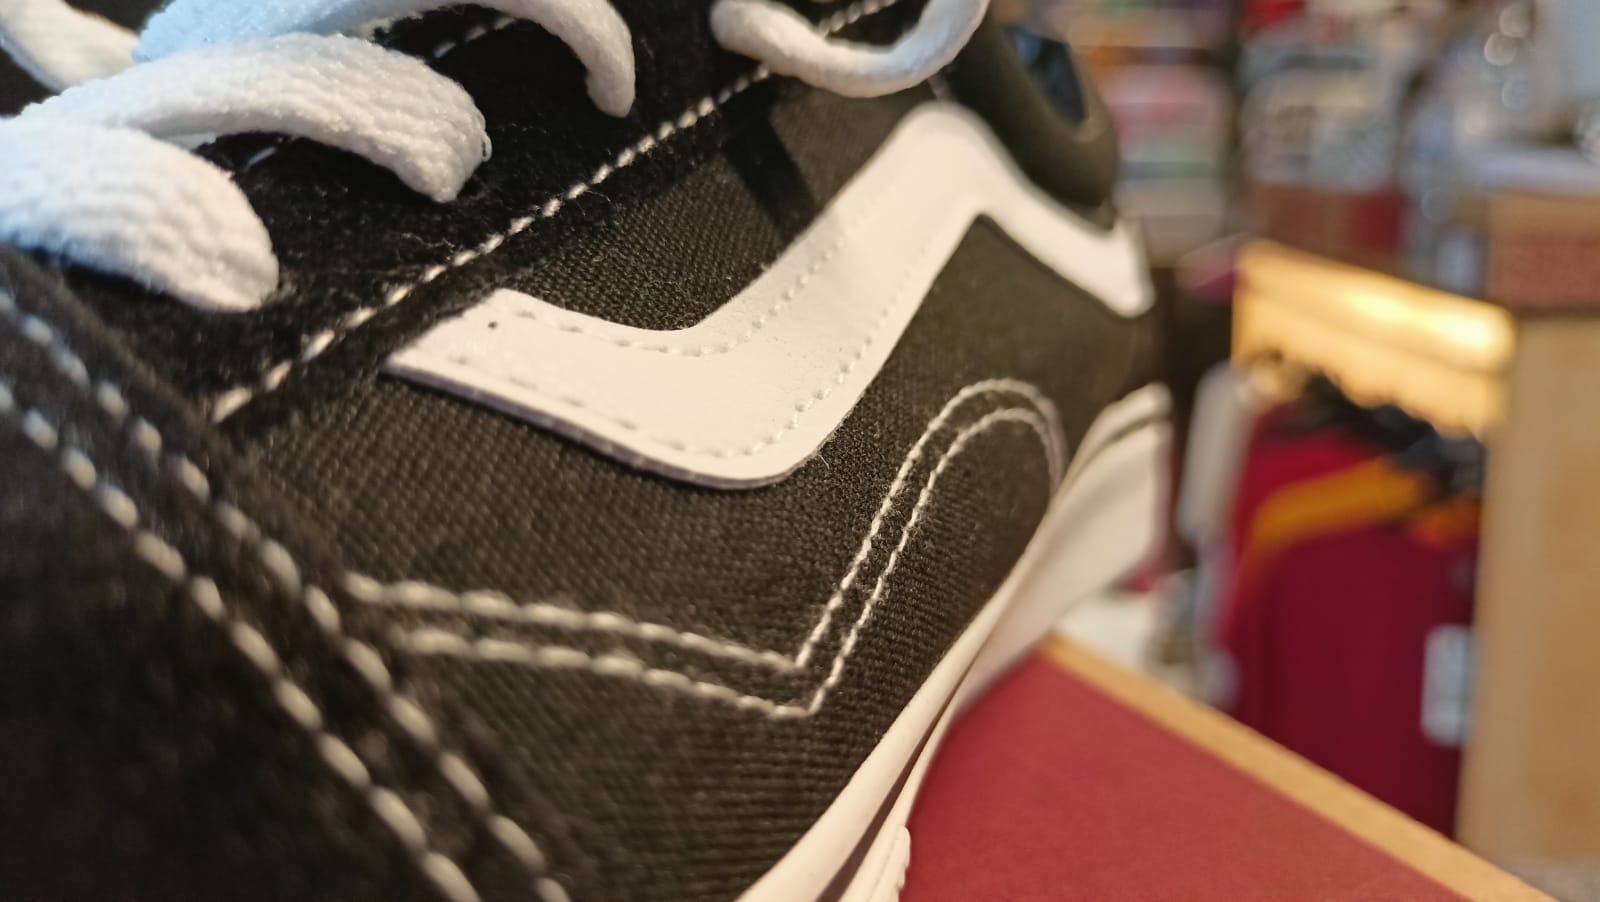 One thing that sets Vans apart from other skate shoe brands is the quality of their materials.